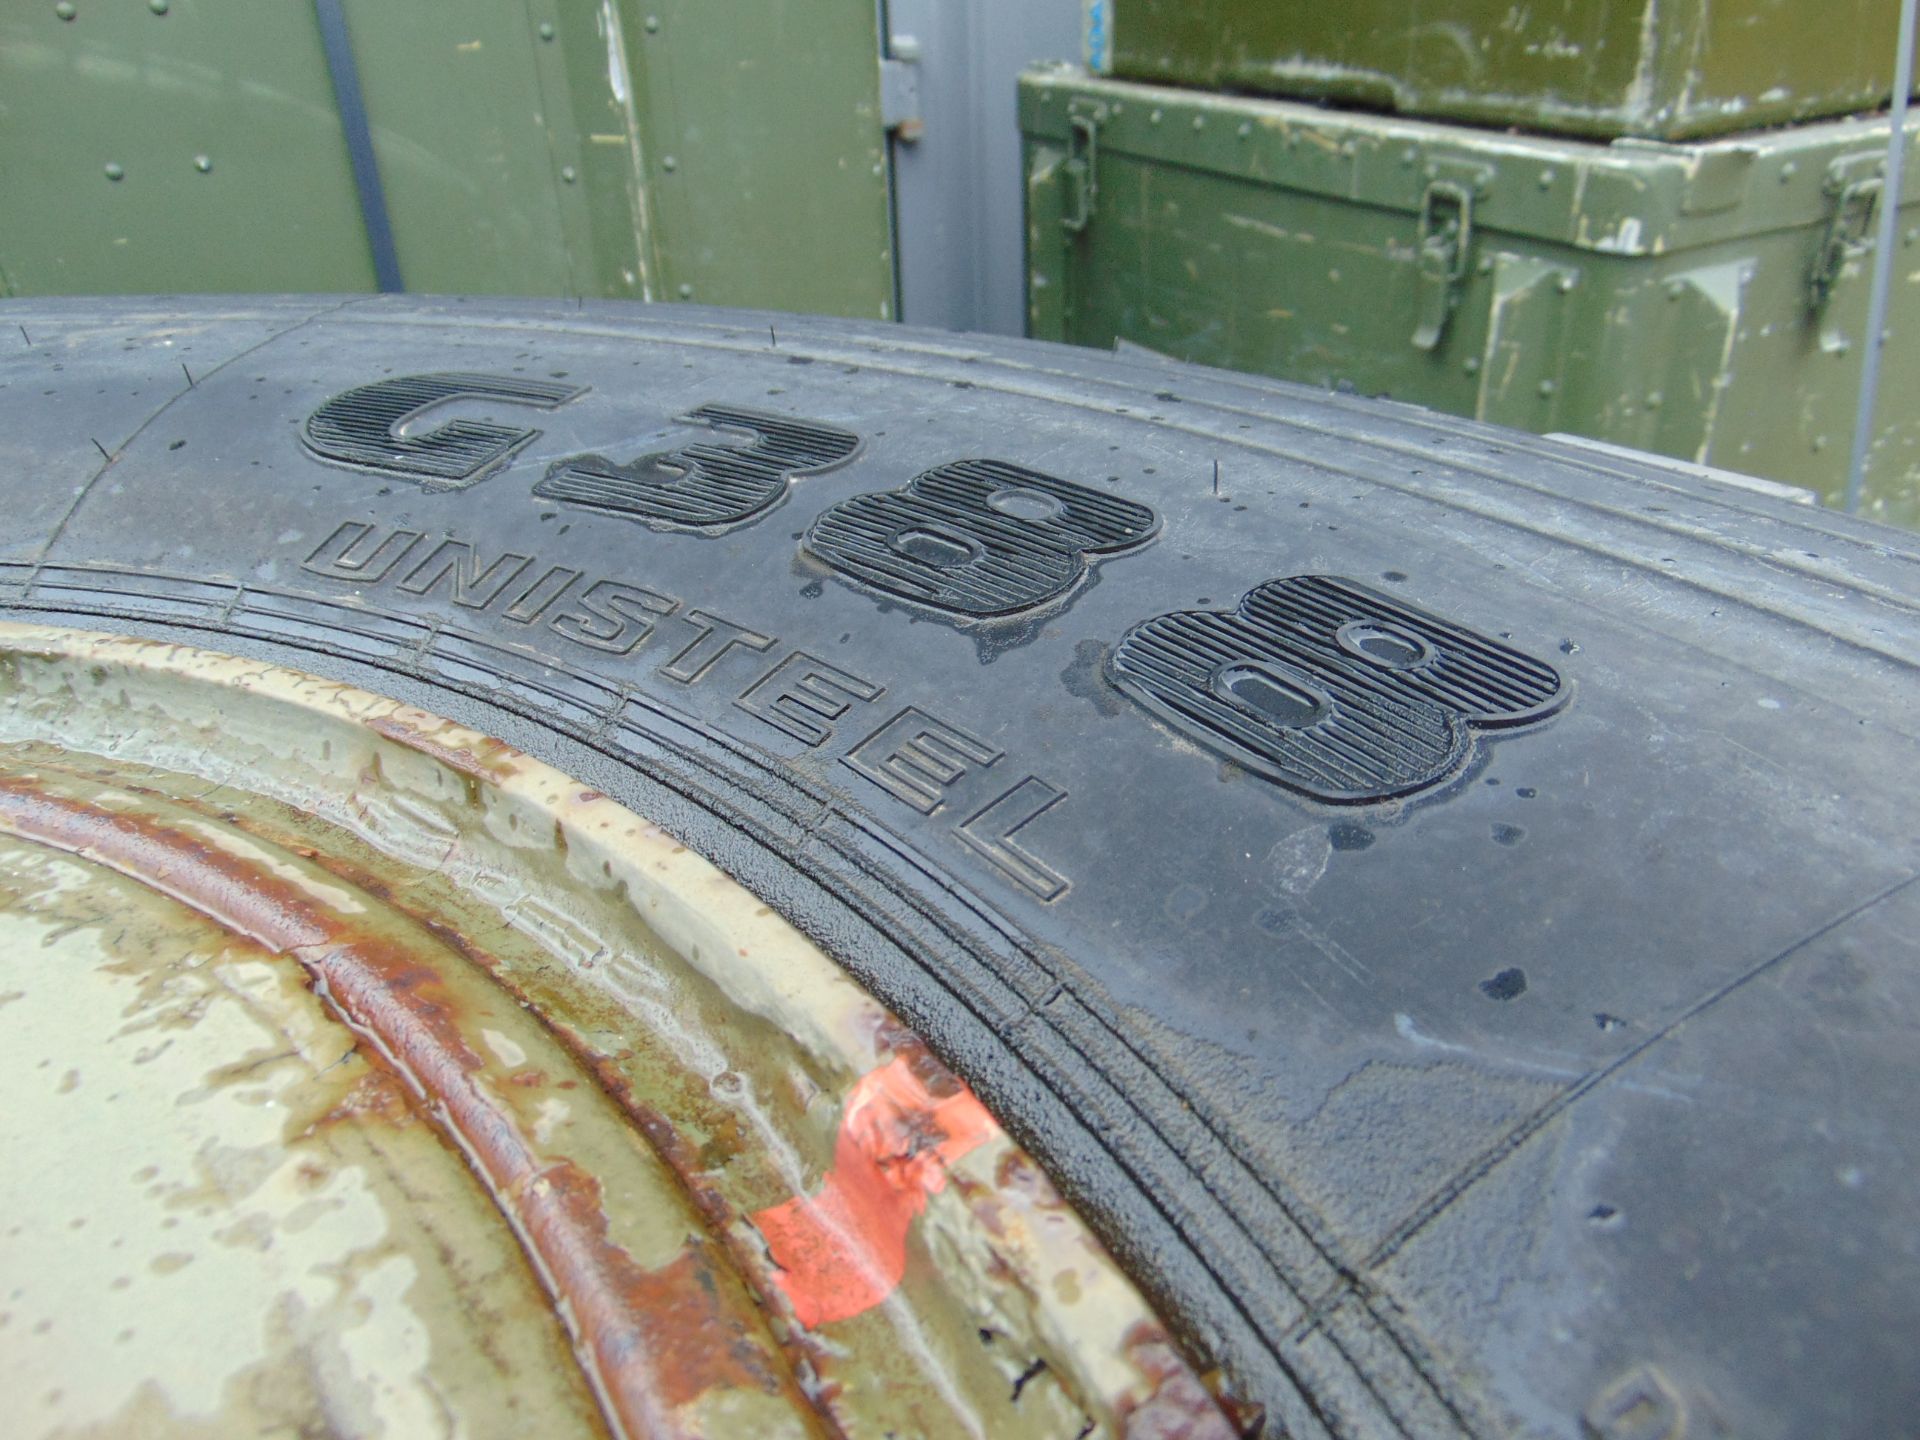 Qty 4 x Goodyear 12.00R20 G388 Unisteel tyres, unused still with bobbles fitted on 8 stud rims - Image 8 of 9